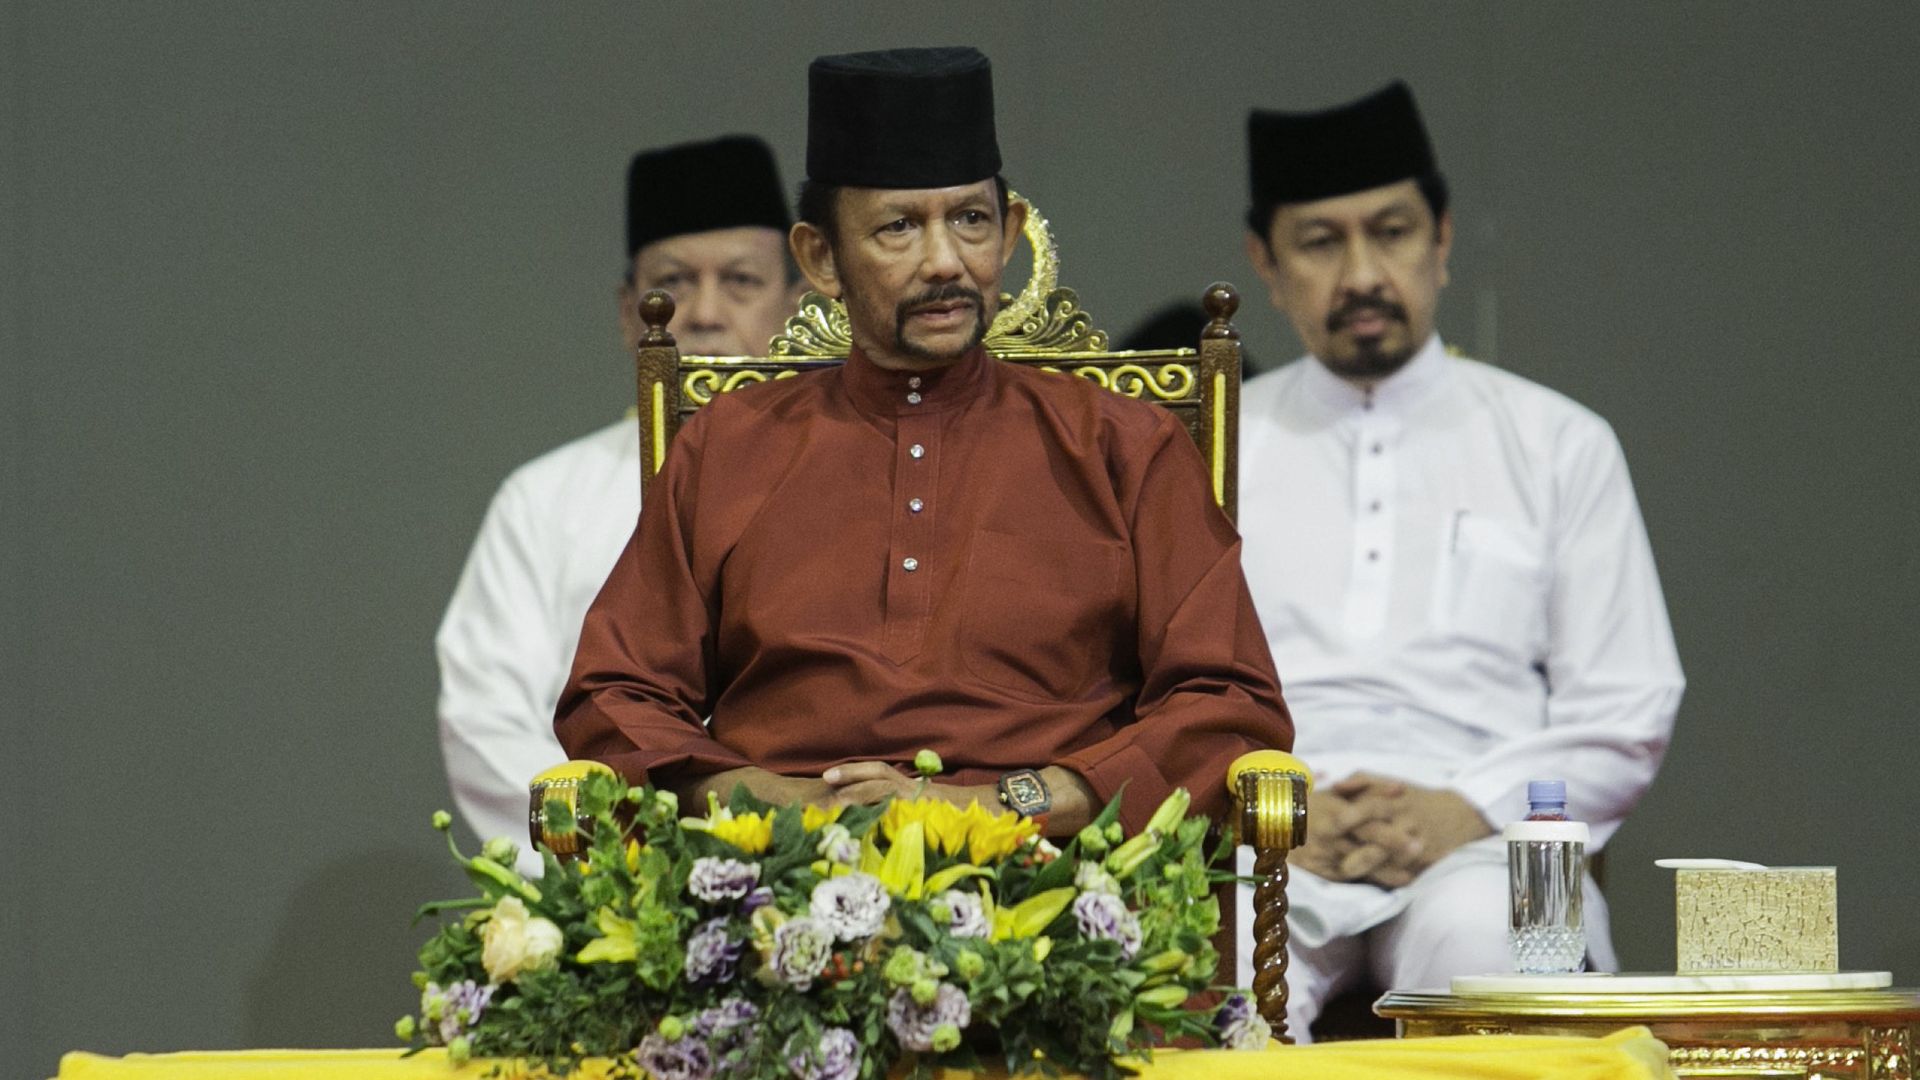 Sultan Hassanal Bolkiah called for "stronger" Islamic teachings as the anti-gay law came into effect Wednesday.